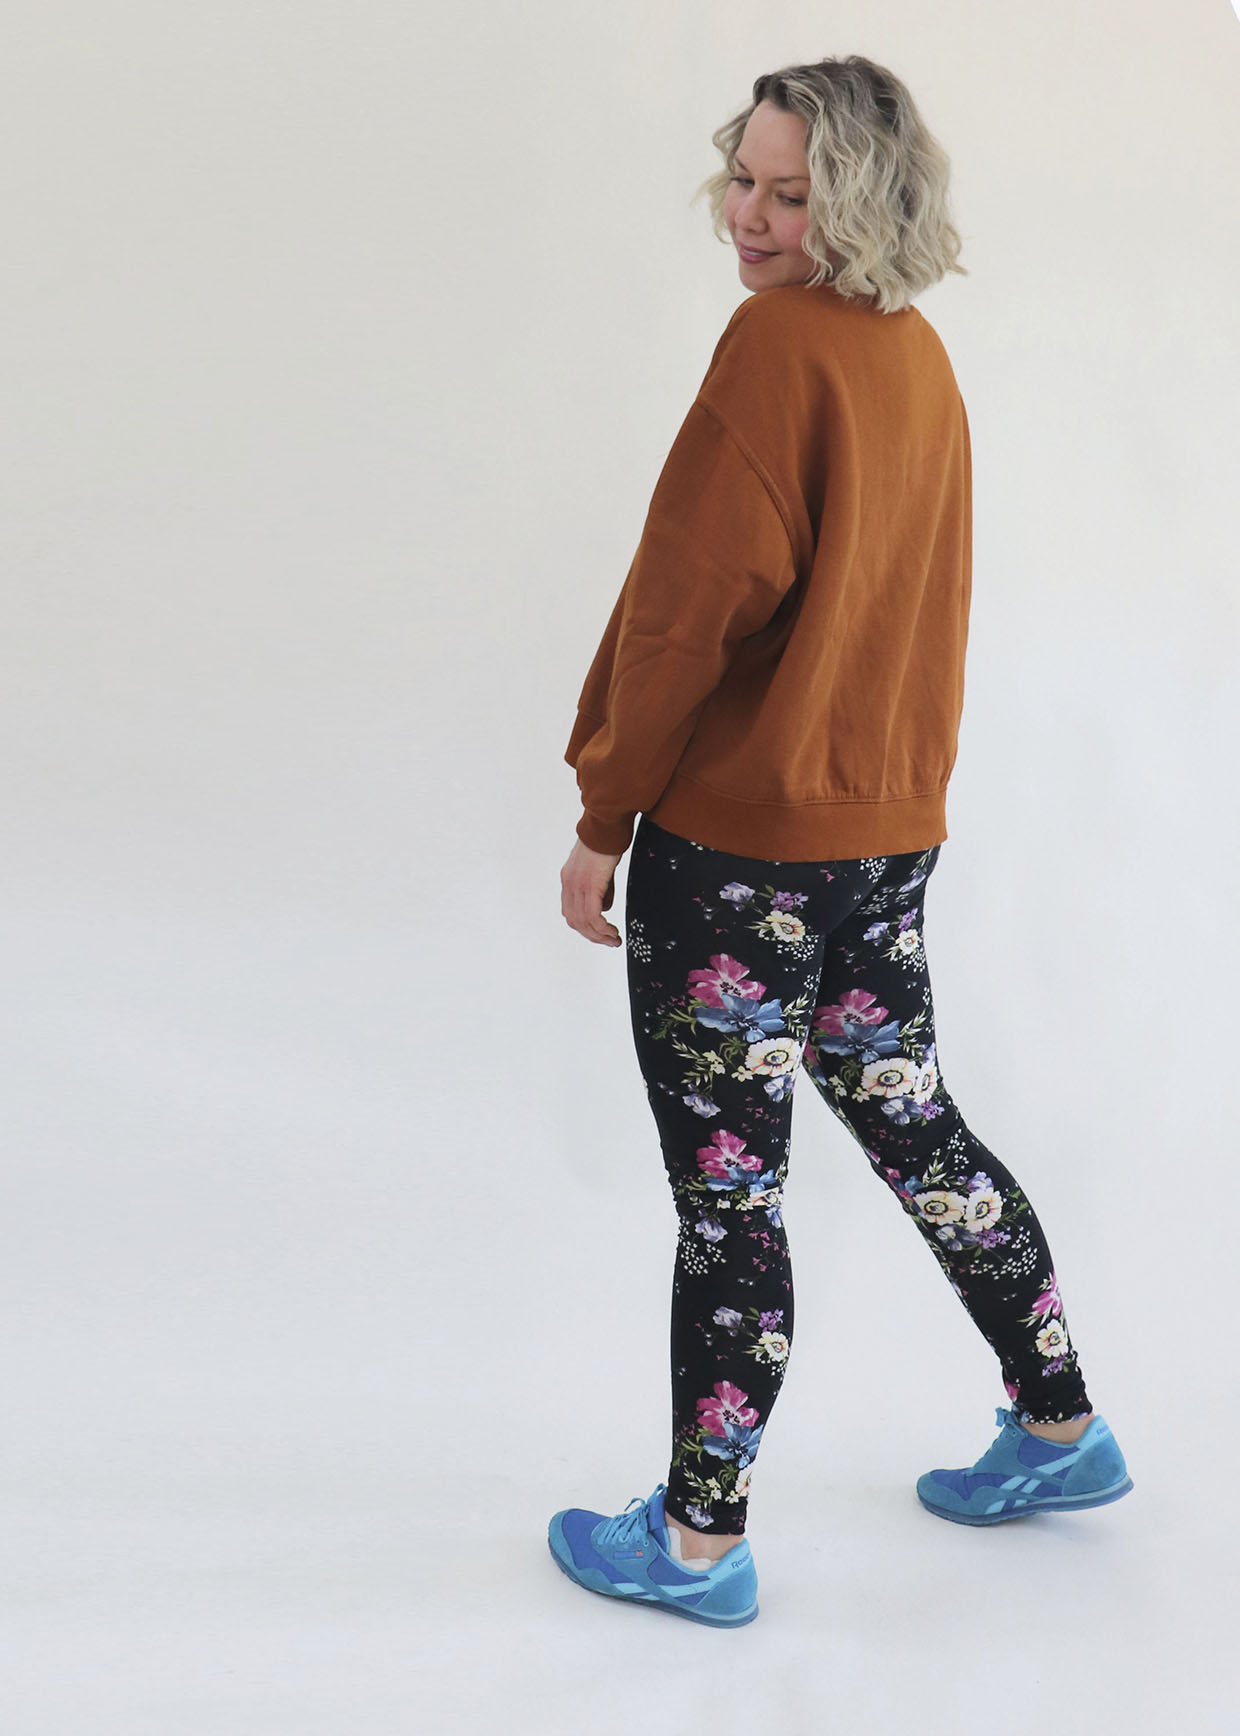 12 smart ways to reuse or recycle old leggings @DIYPROCESSBYHEMA - YouTube